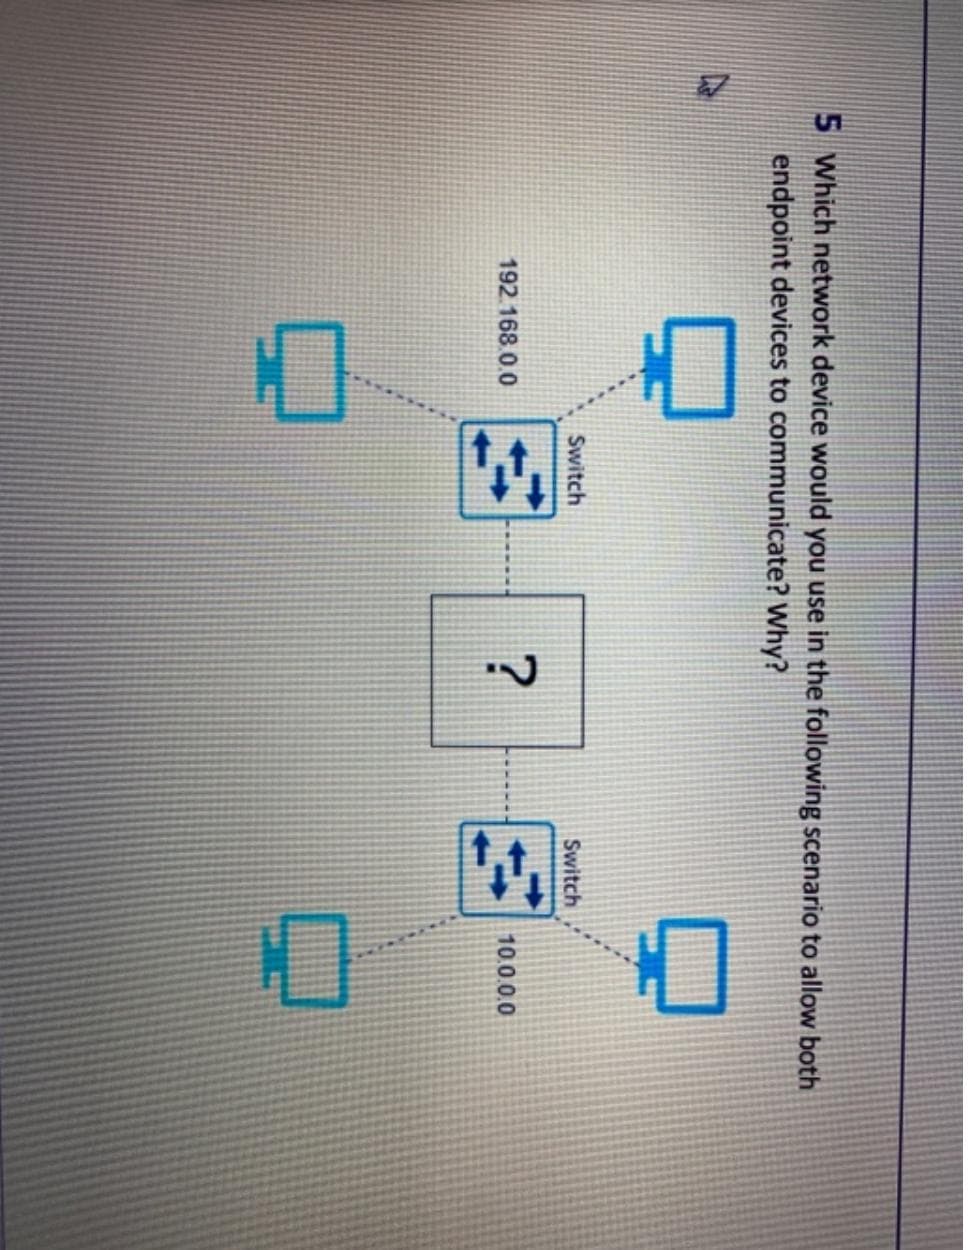 5 Which network device would you use in the following scenario to allow both
endpoint devices to communicate? Why?
Switch
Switch
192.168.0.0
10.0.0.0
